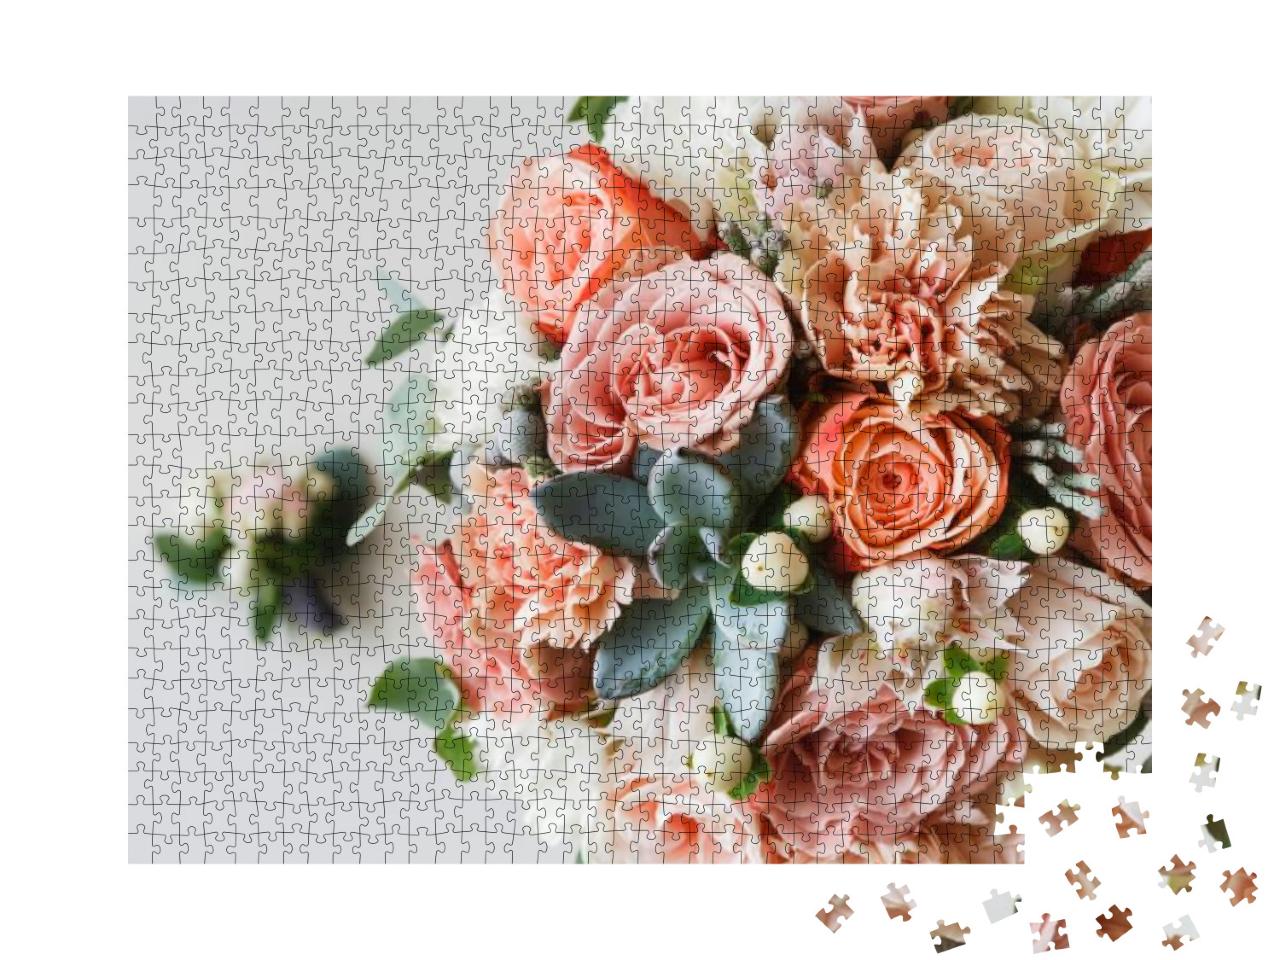 Wedding Flowers, Bridal Bouquet Closeup. Decoration Made... Jigsaw Puzzle with 1000 pieces